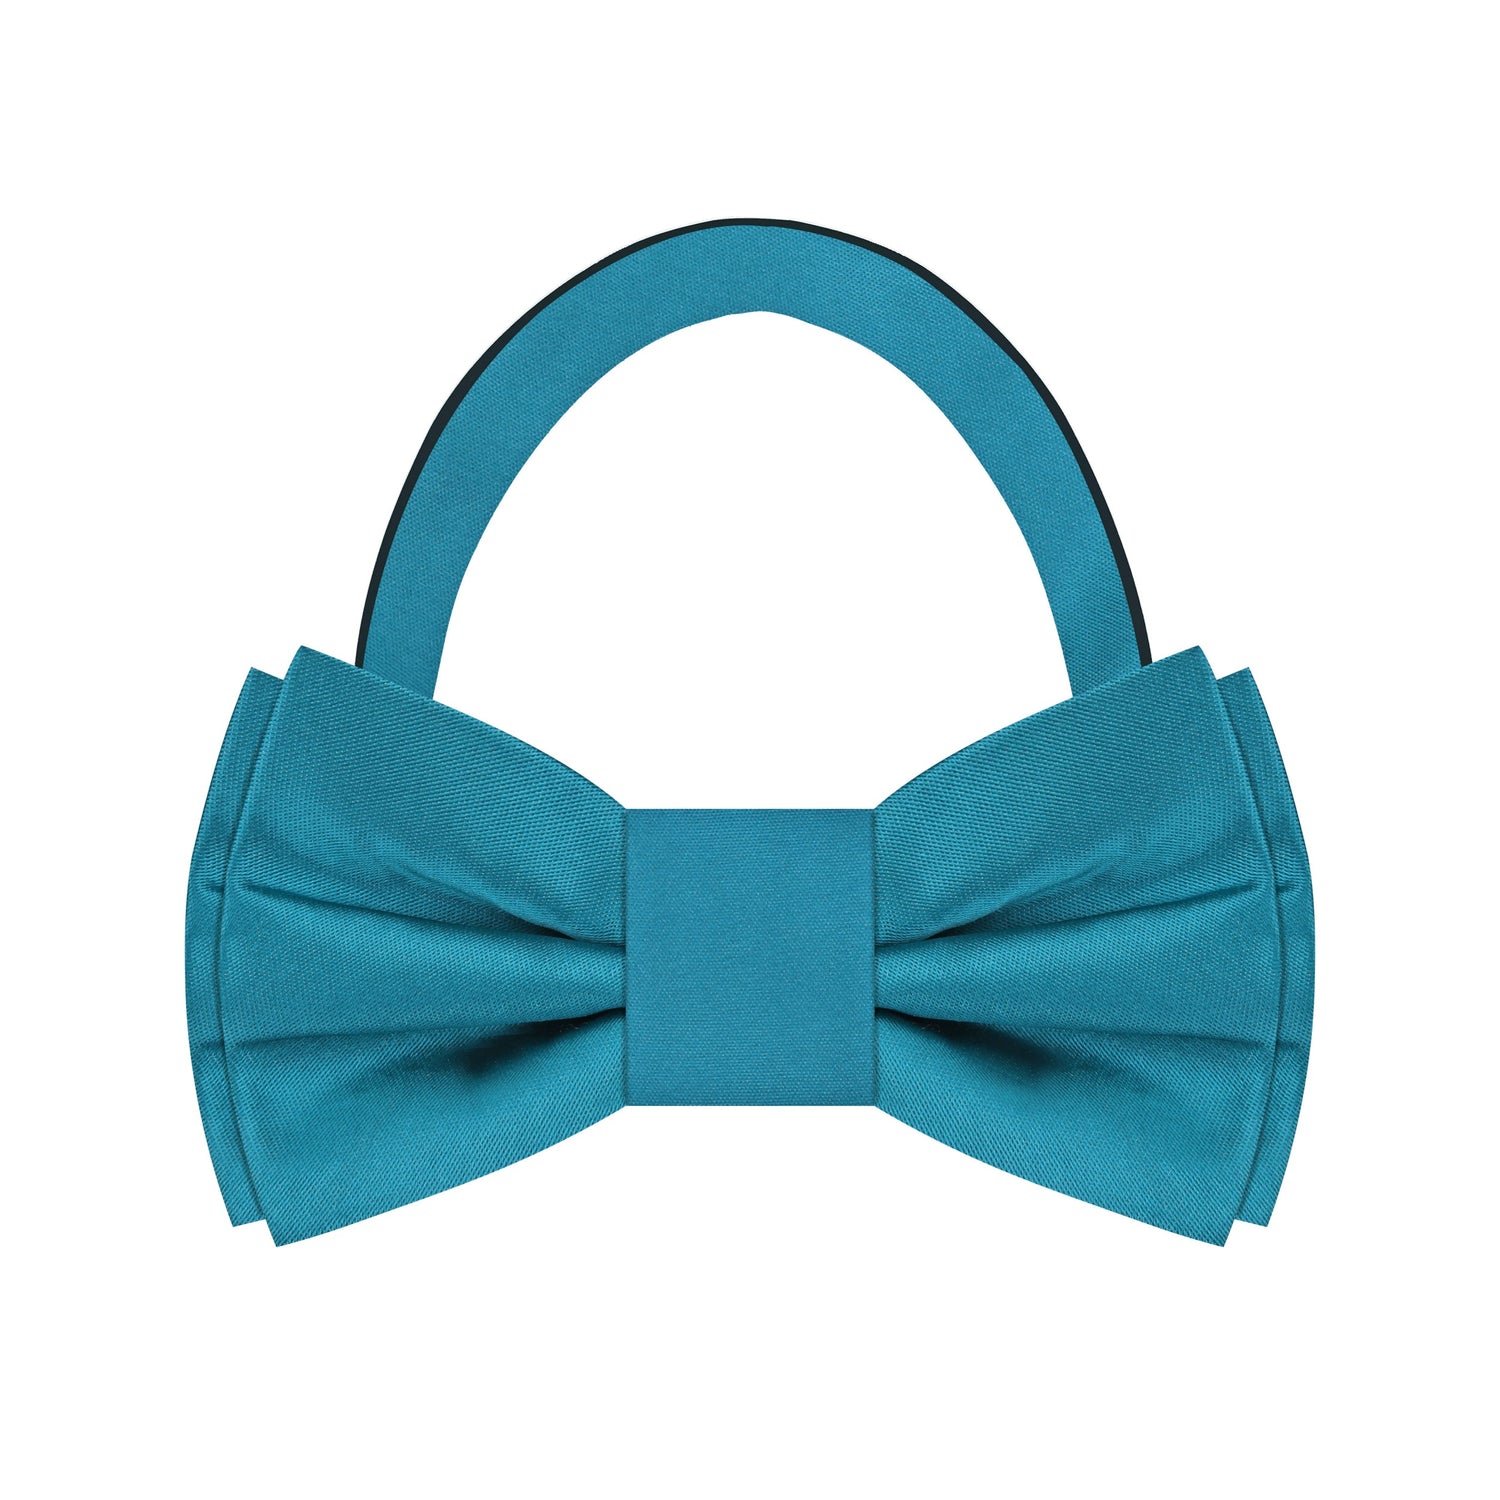 Caribbean Solid Colored Bow Tie Pre Tied